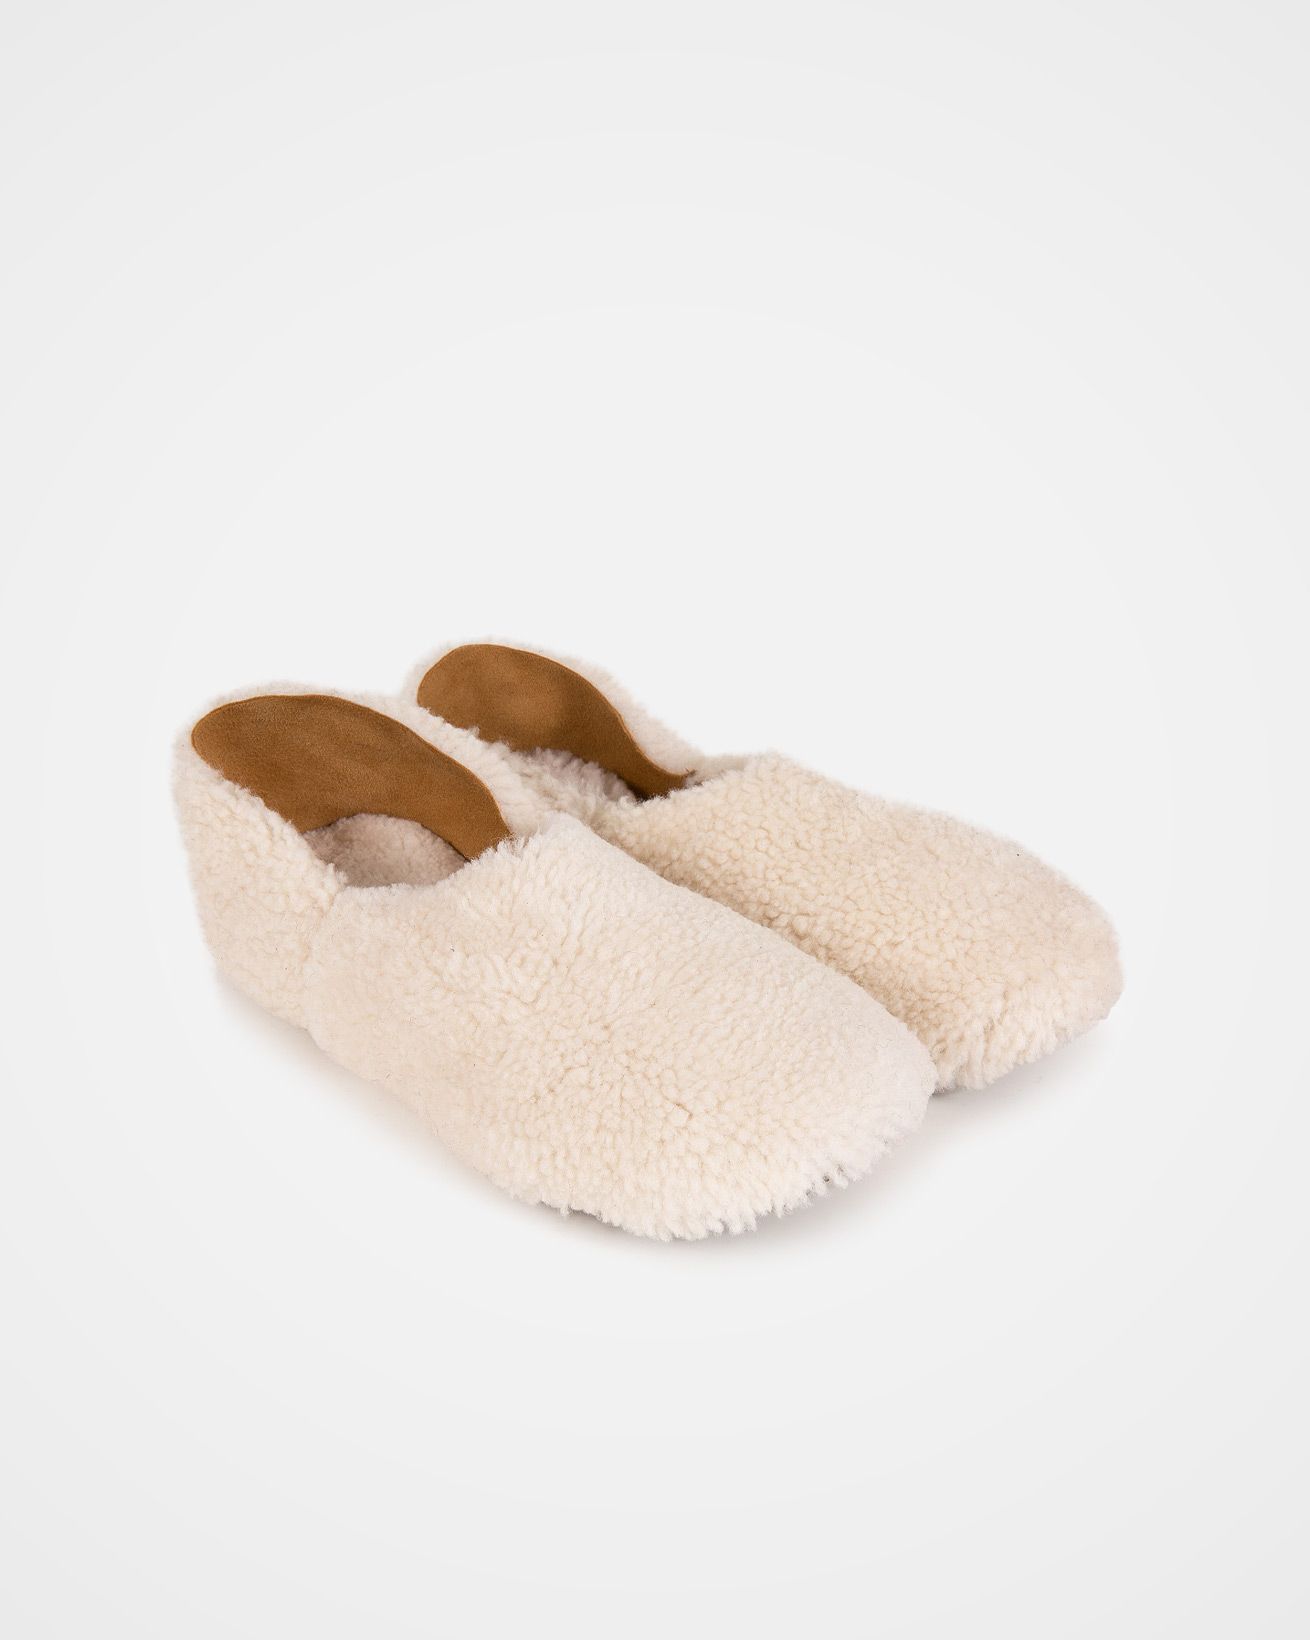 Cocoon Slippers / Ivory / 5